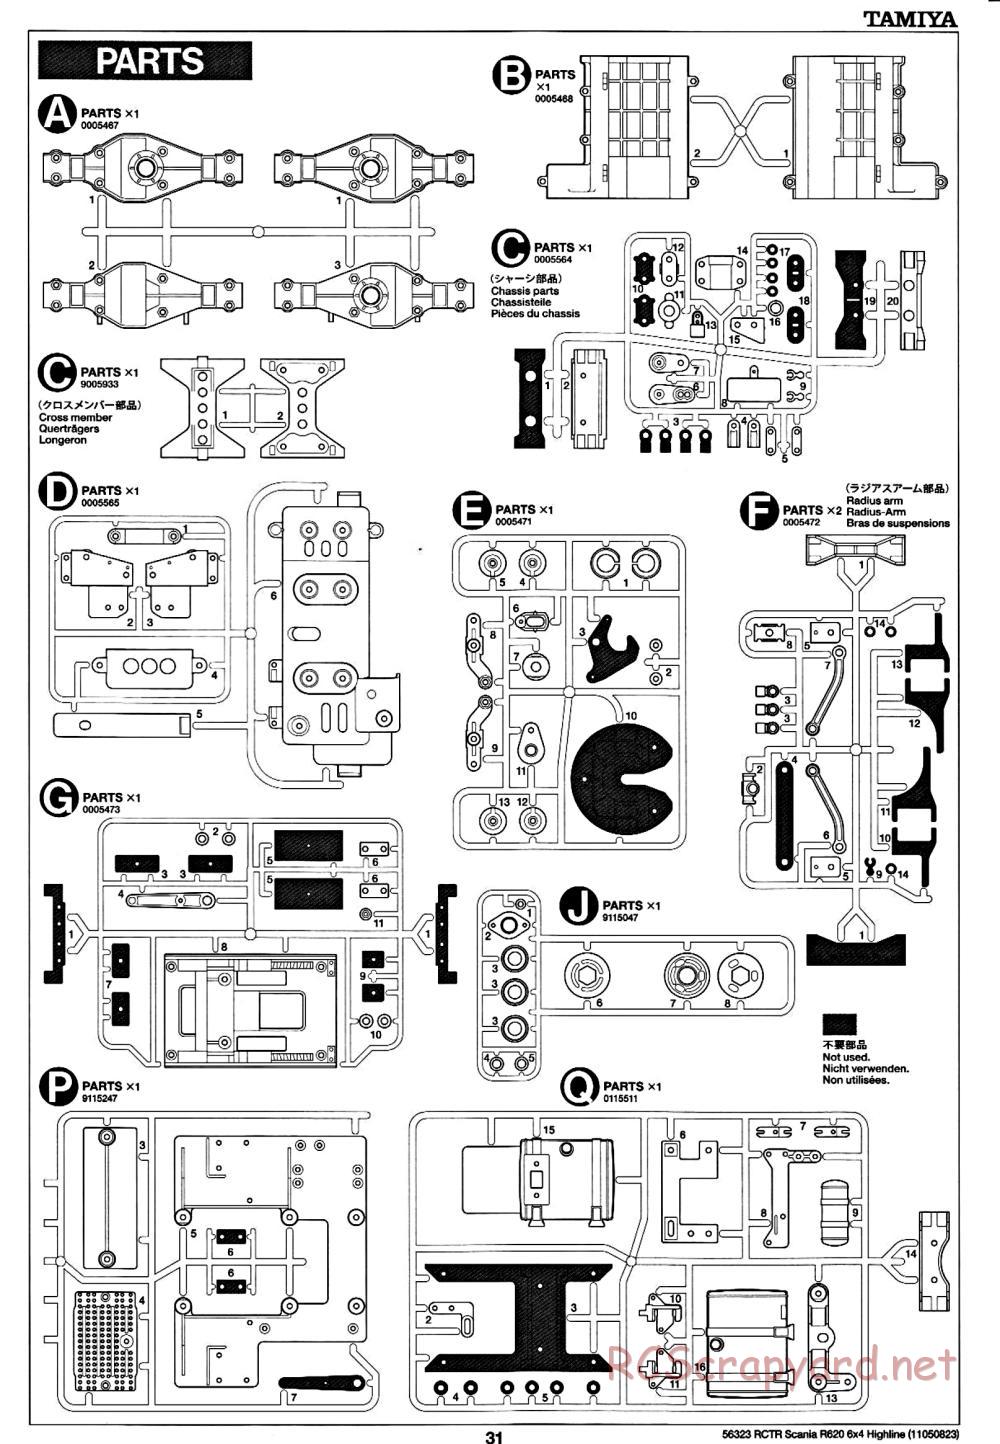 Tamiya - Scania R620 6x4 Highline Tractor Truck Chassis - Manual - Page 31